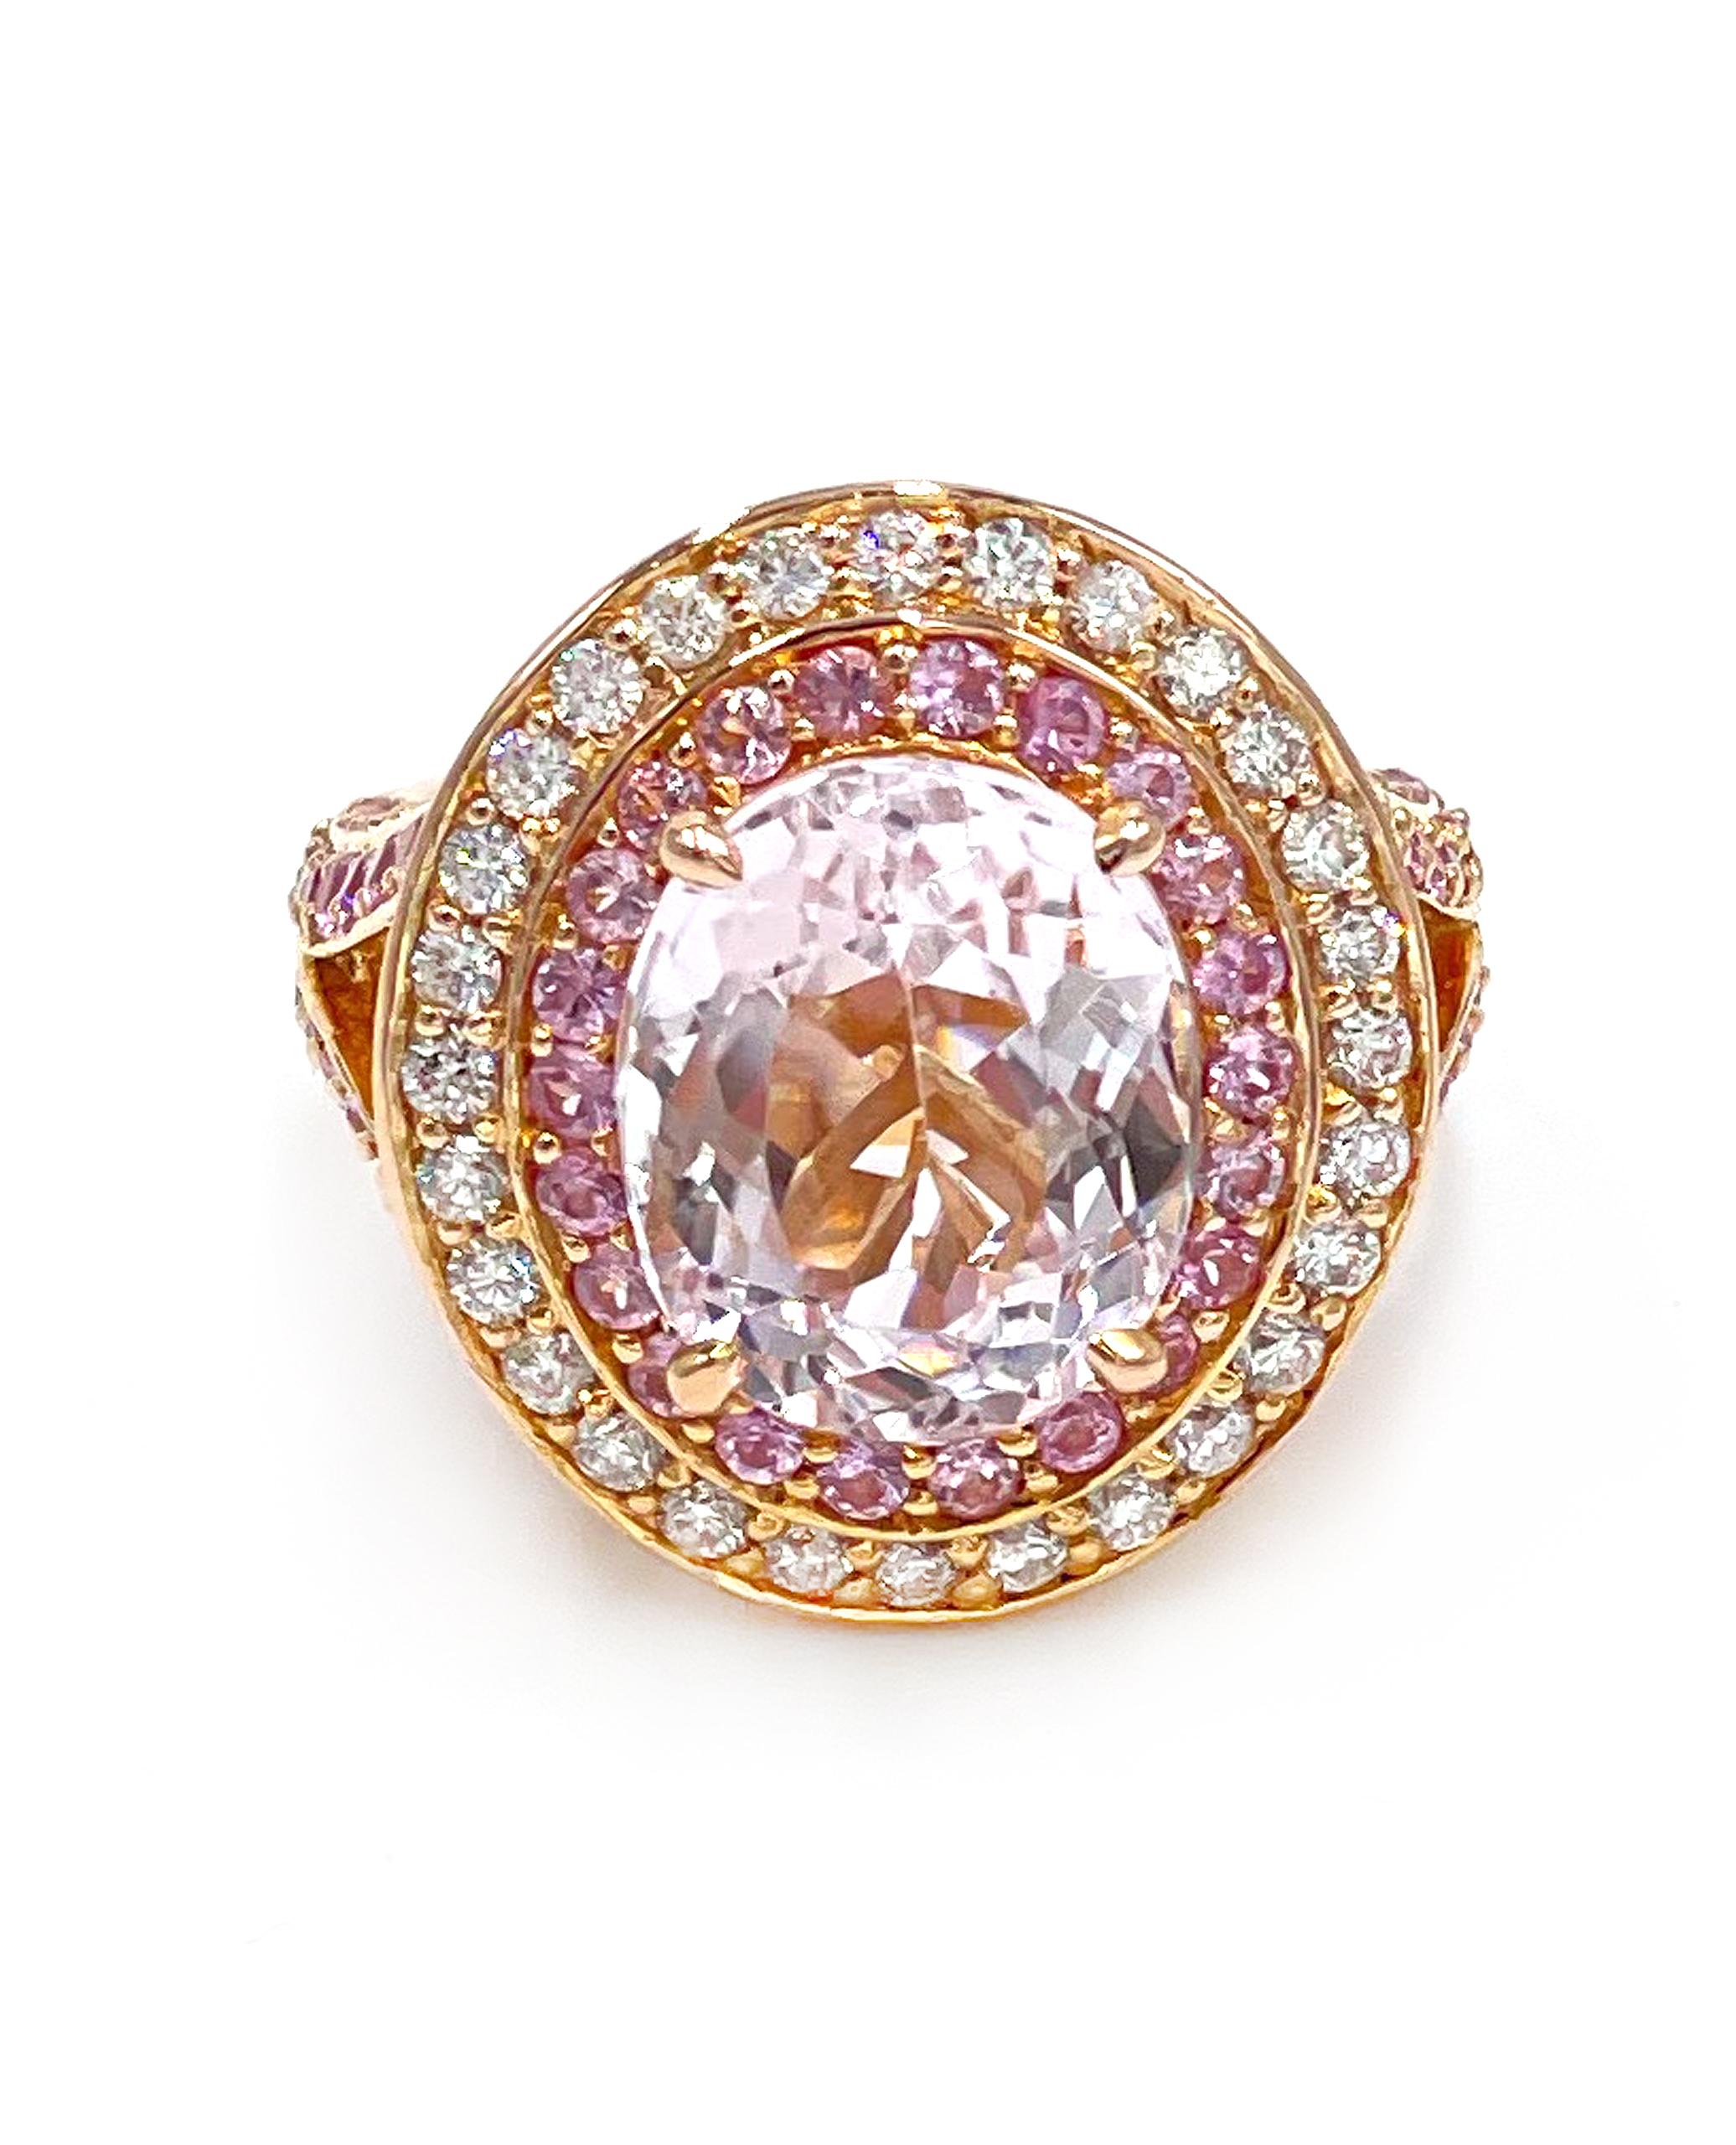 14K rose gold split shank double halo ring furnished with 78 pink sapphires 1.55 carats total weight and 28 round brilliant-cut diamonds 0.60 carats total weight.  In the center, there is one oval shape kunzite 5.93 carats.  

* Finger size 6
*